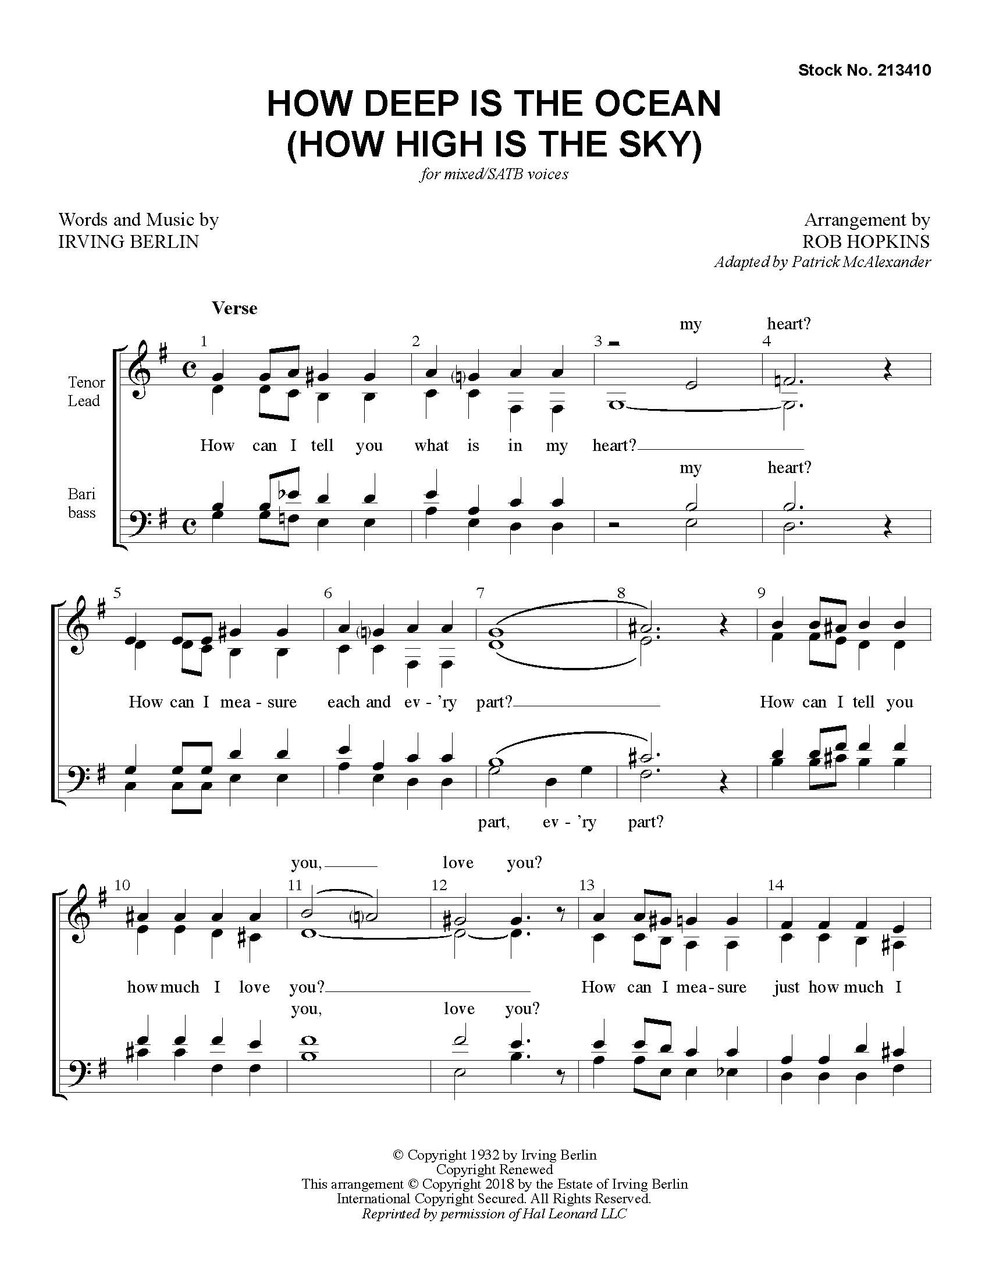 How Deep is the Ocean (How High is the Sky) (SATB) (arr. Hopkins) - Download